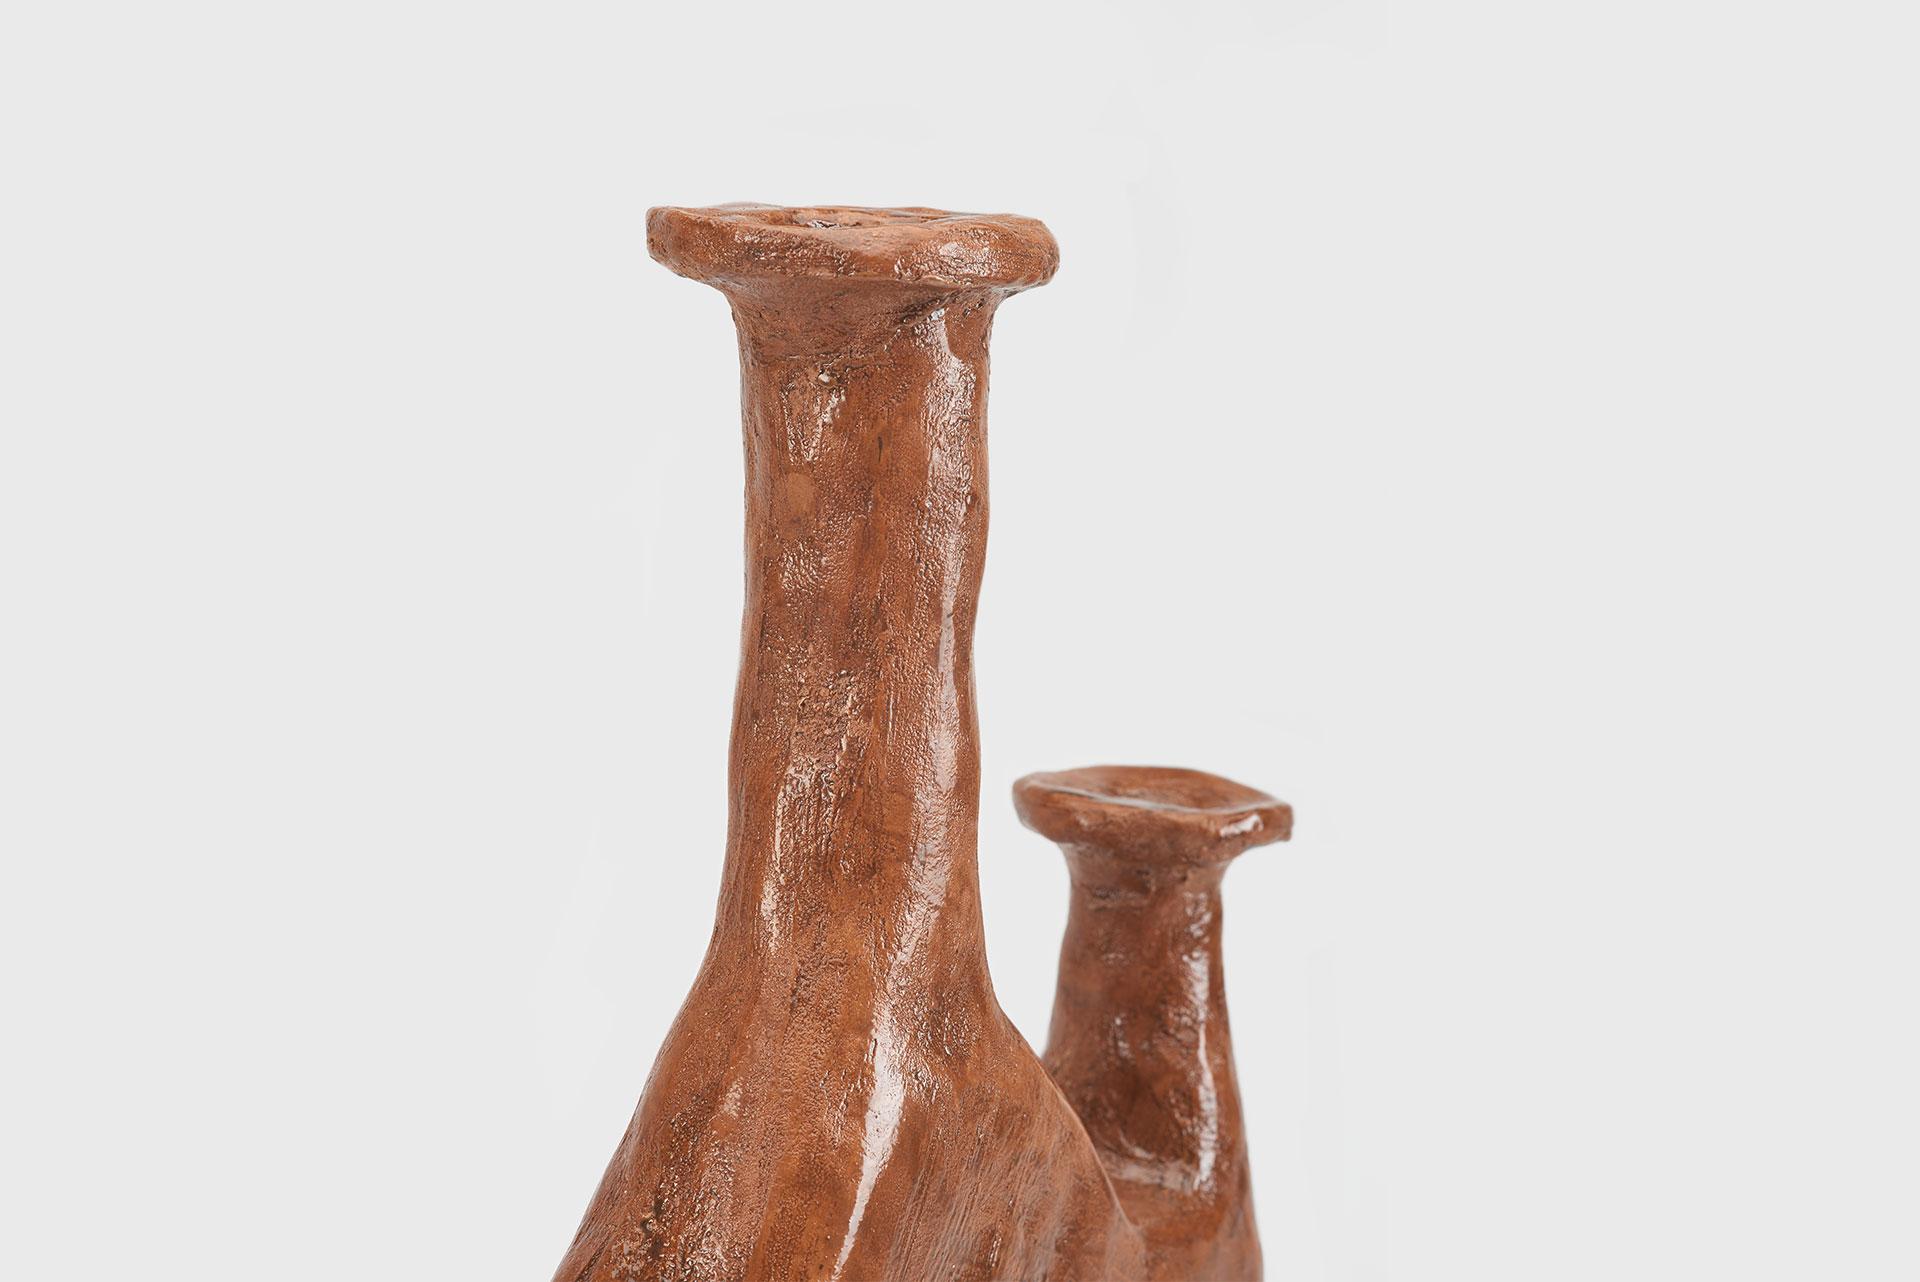 Ceramic vase model “Uble”
From the series 